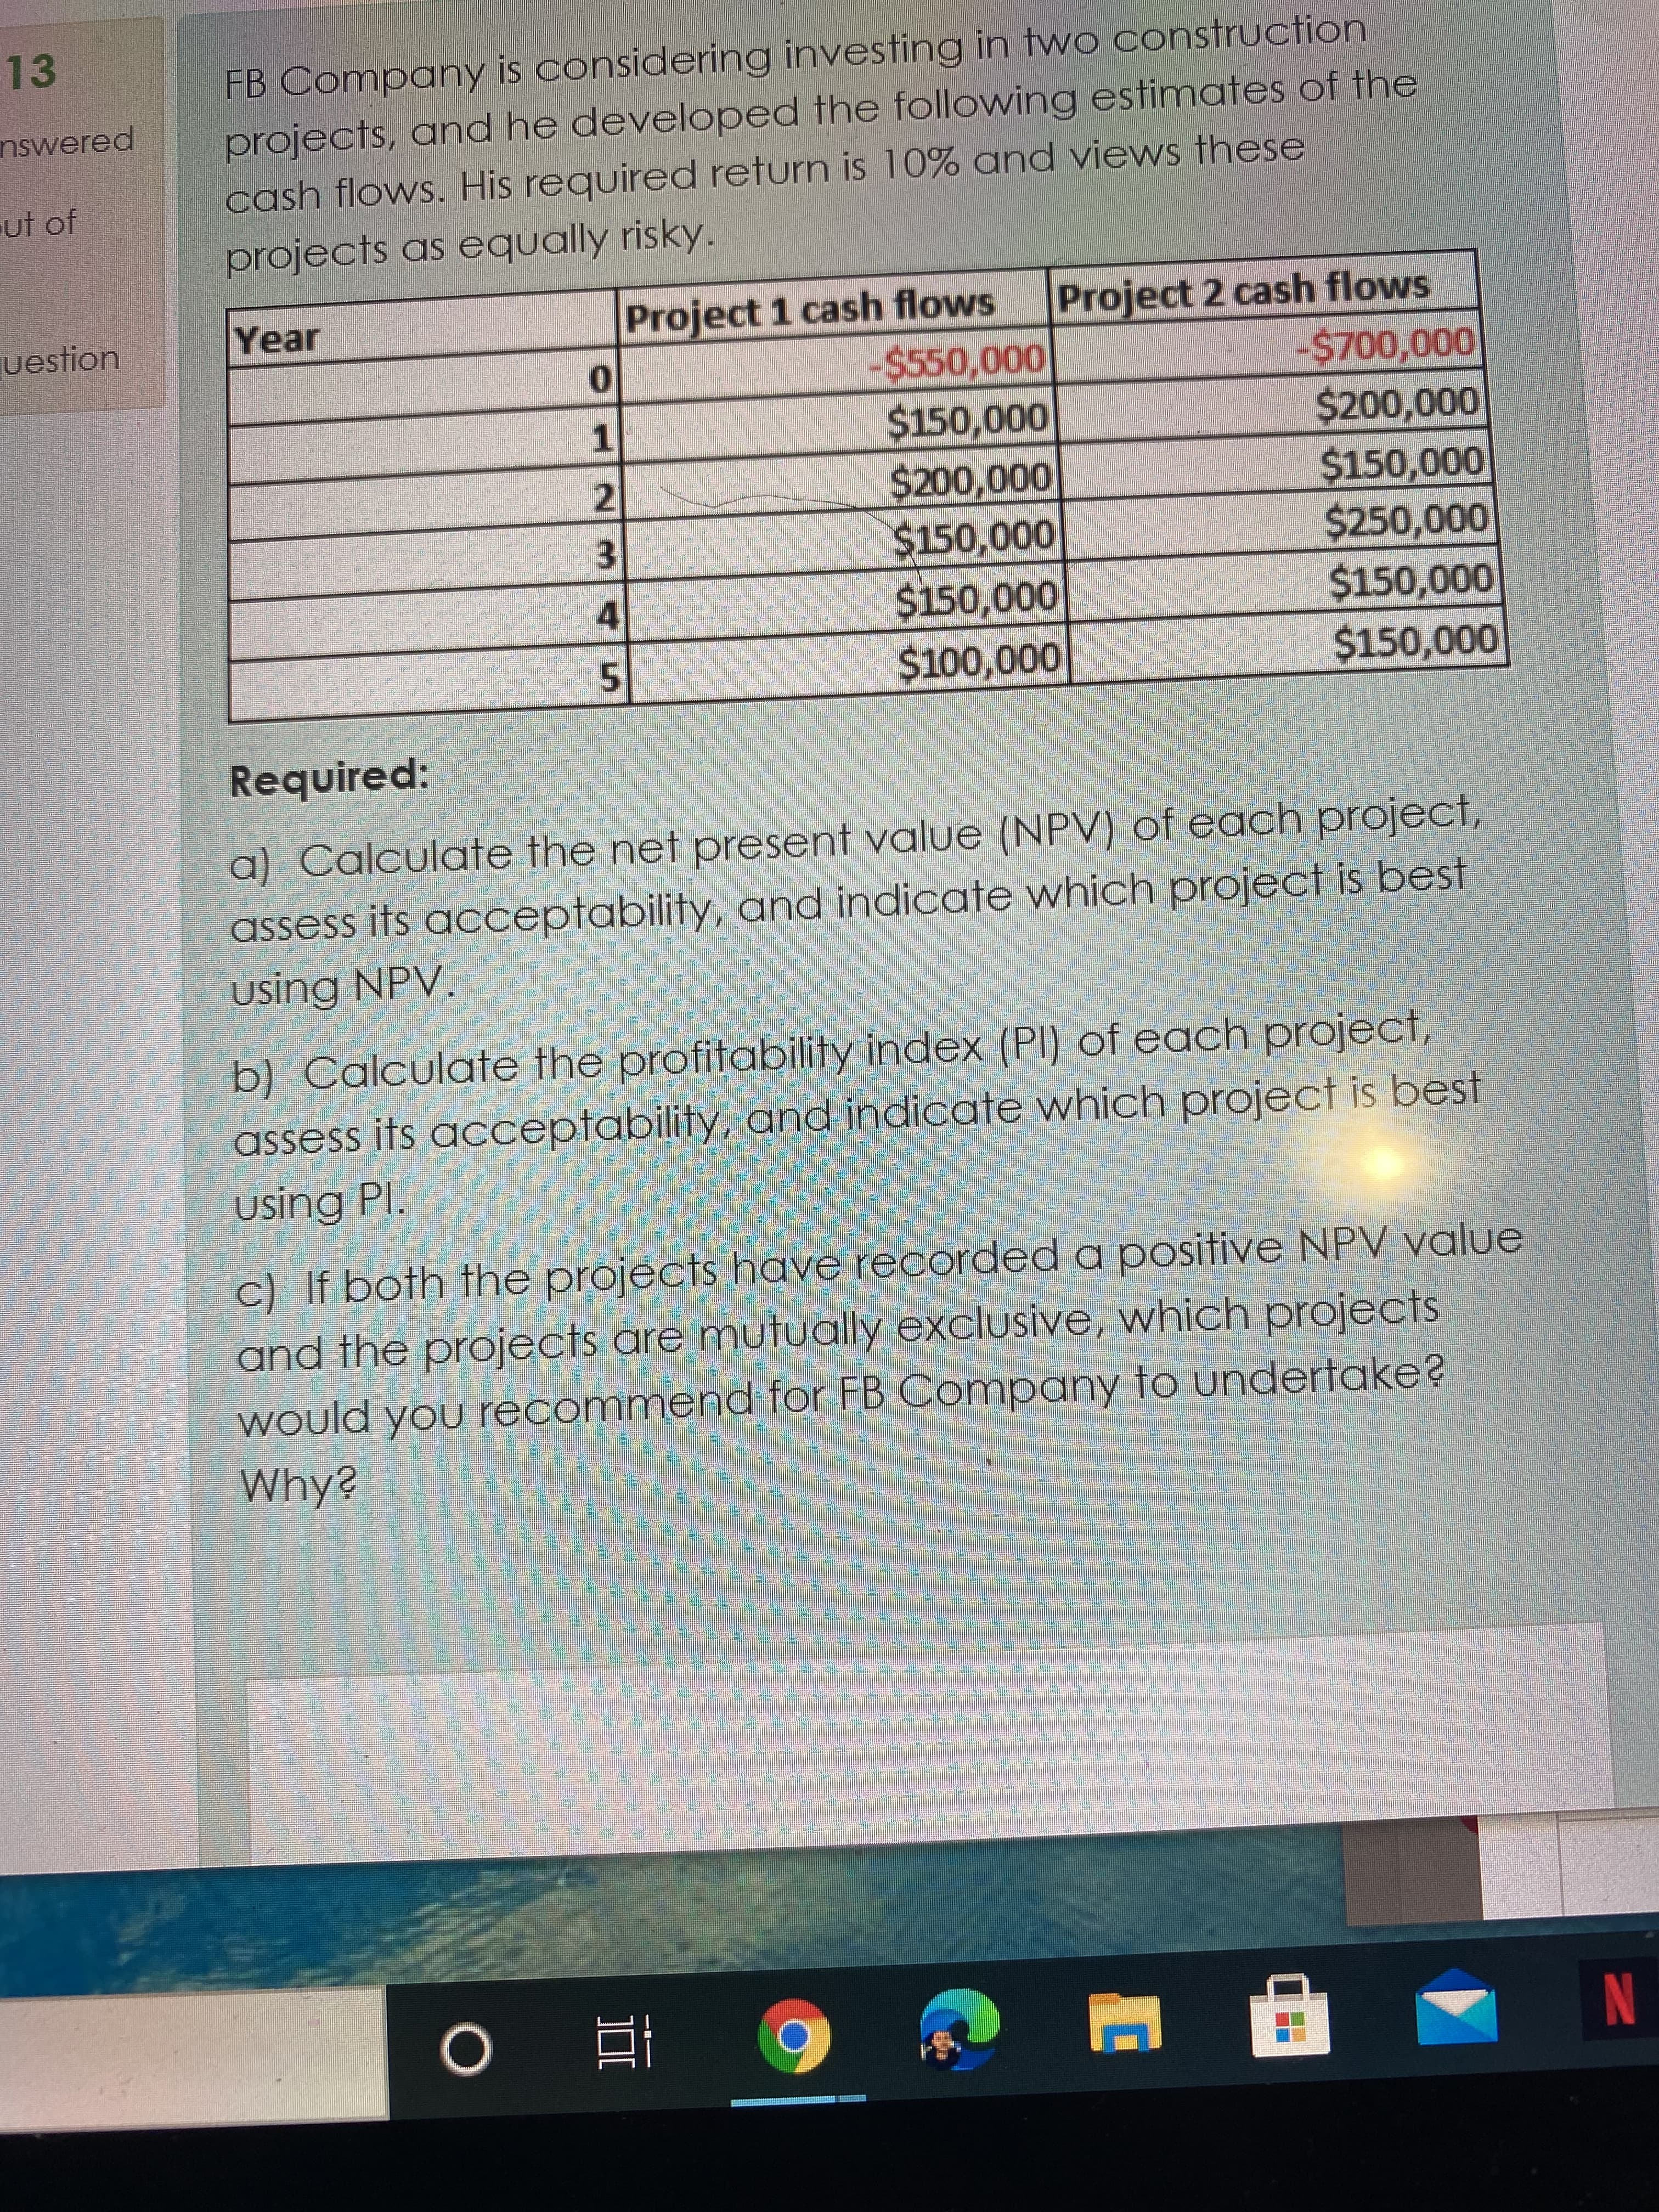 2.
13
FB Company is considering investing in two construction
projects, and he developed the following estimates of the
cash flows. His required return is 10% and views these
nswered
ut of
projects as equally risky.
Project 1 cash flows
-$550,000
Project 2 cash flows
-%24700,000
uestion
Year
$150,000
1.
000'000
$150,000
$150,000
000'000
$150,000
000'osz$
4
000'OST$
000'OST$
000'00T$
Required:
a) Calculate the net present value (NPV) of each project,
assess its acceptability, and indicate which project is best
using NPV.
b) Calculate the profitability index (PI) of each project,
assess its acceptability, and indicate which project is best
using Pl.
c) If both the projects have recorded a positive NPV value
and the projects are mutually exclusive, which projects
would you recommend for FB Company to undertake?
Why?
謝
近 0
N
